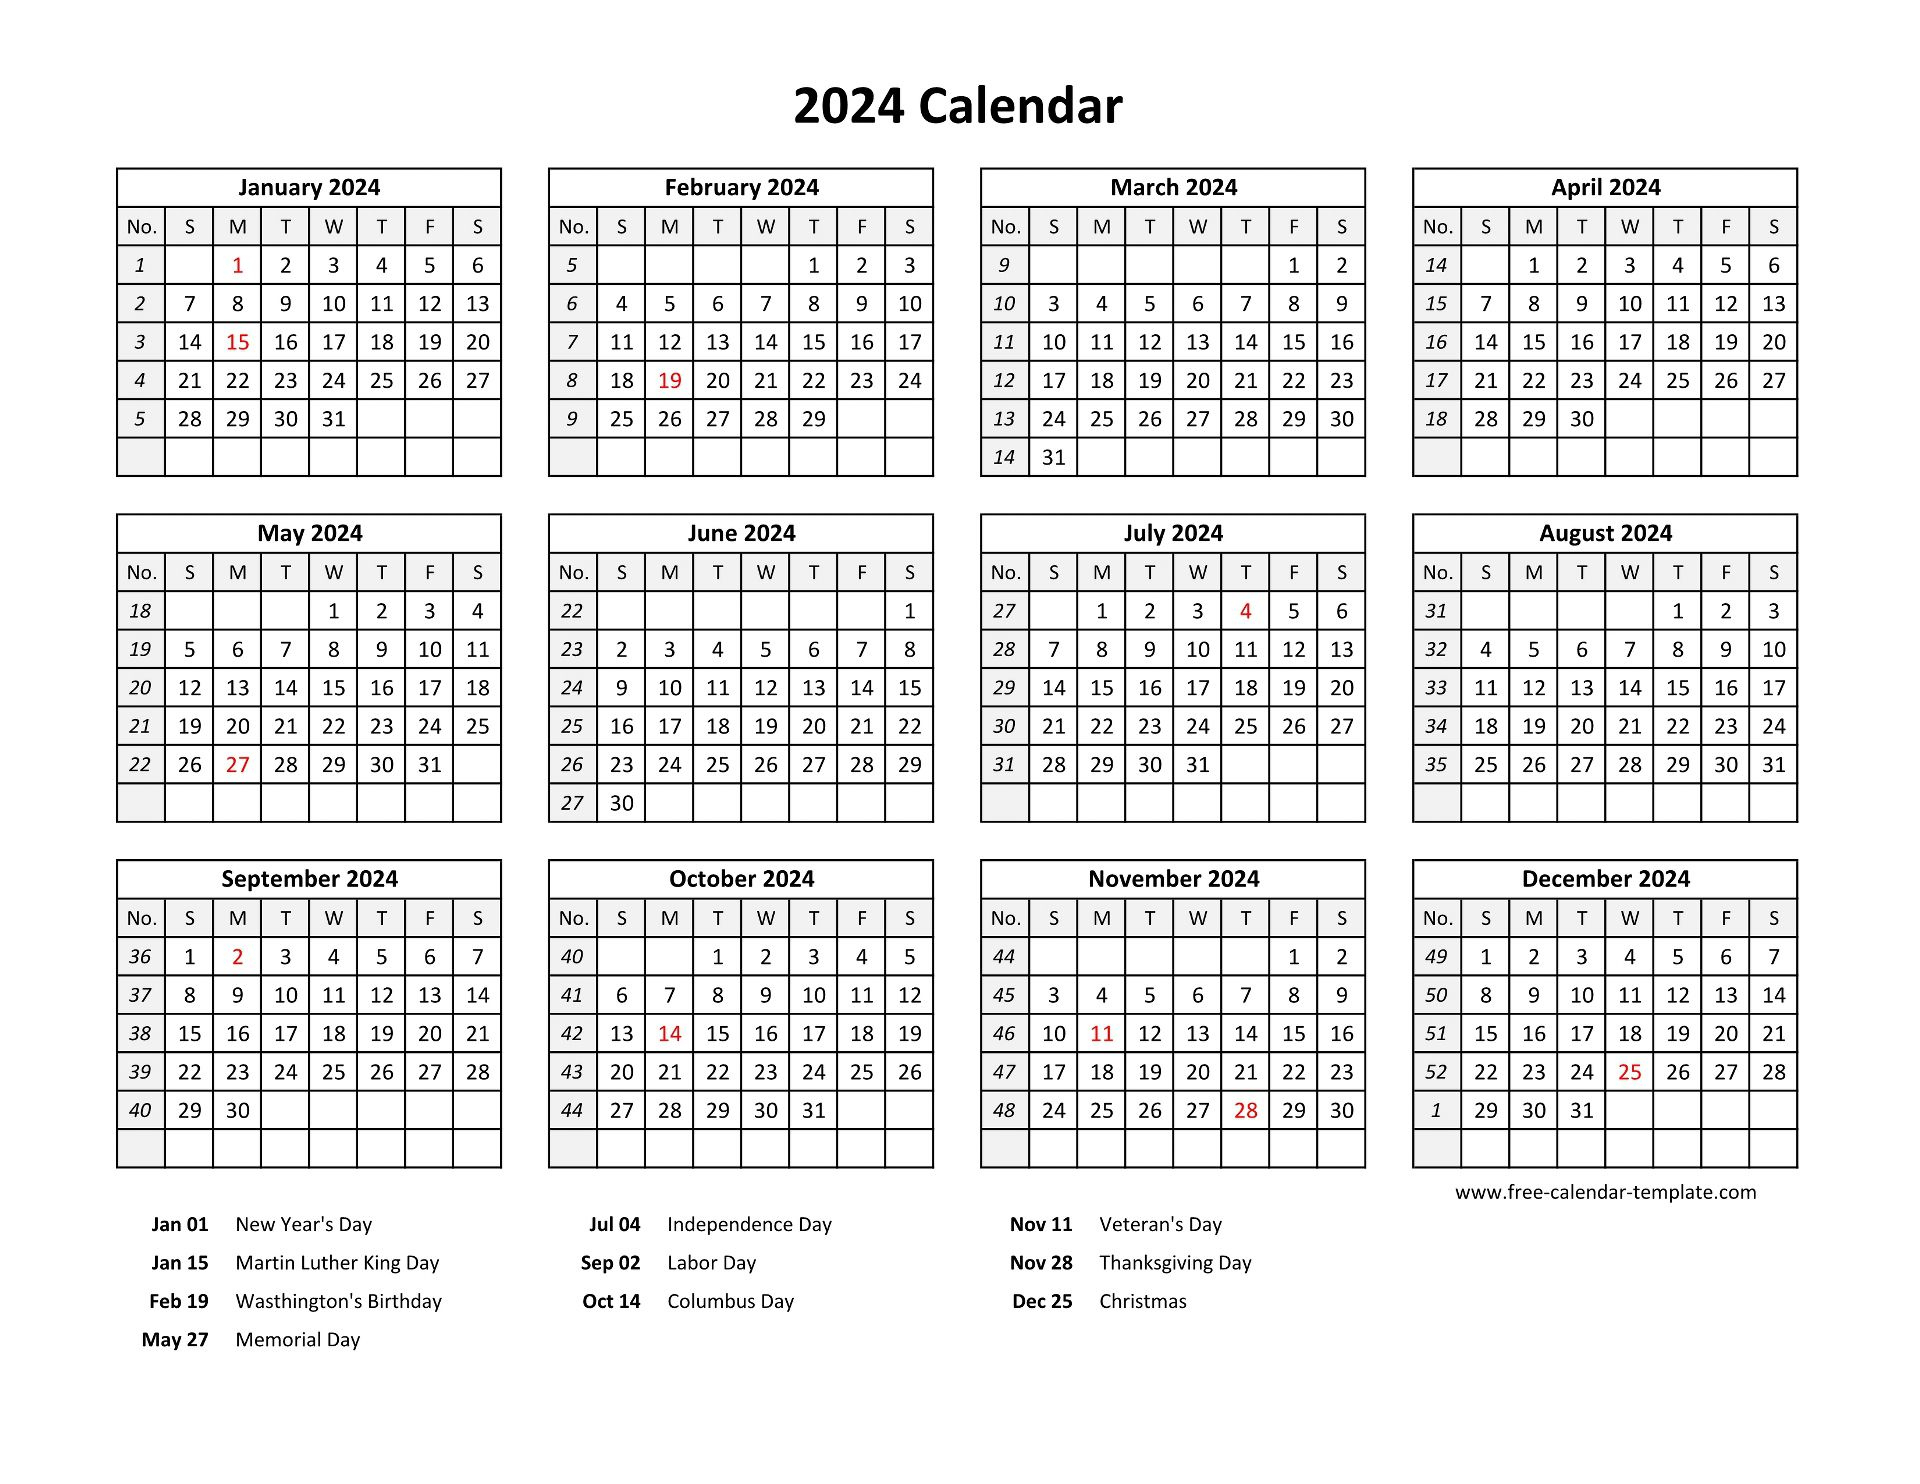 Printable Yearly Calendar 2024 With Us Holidays | Free-Calendar | 2024 Yearly Calendar In Word